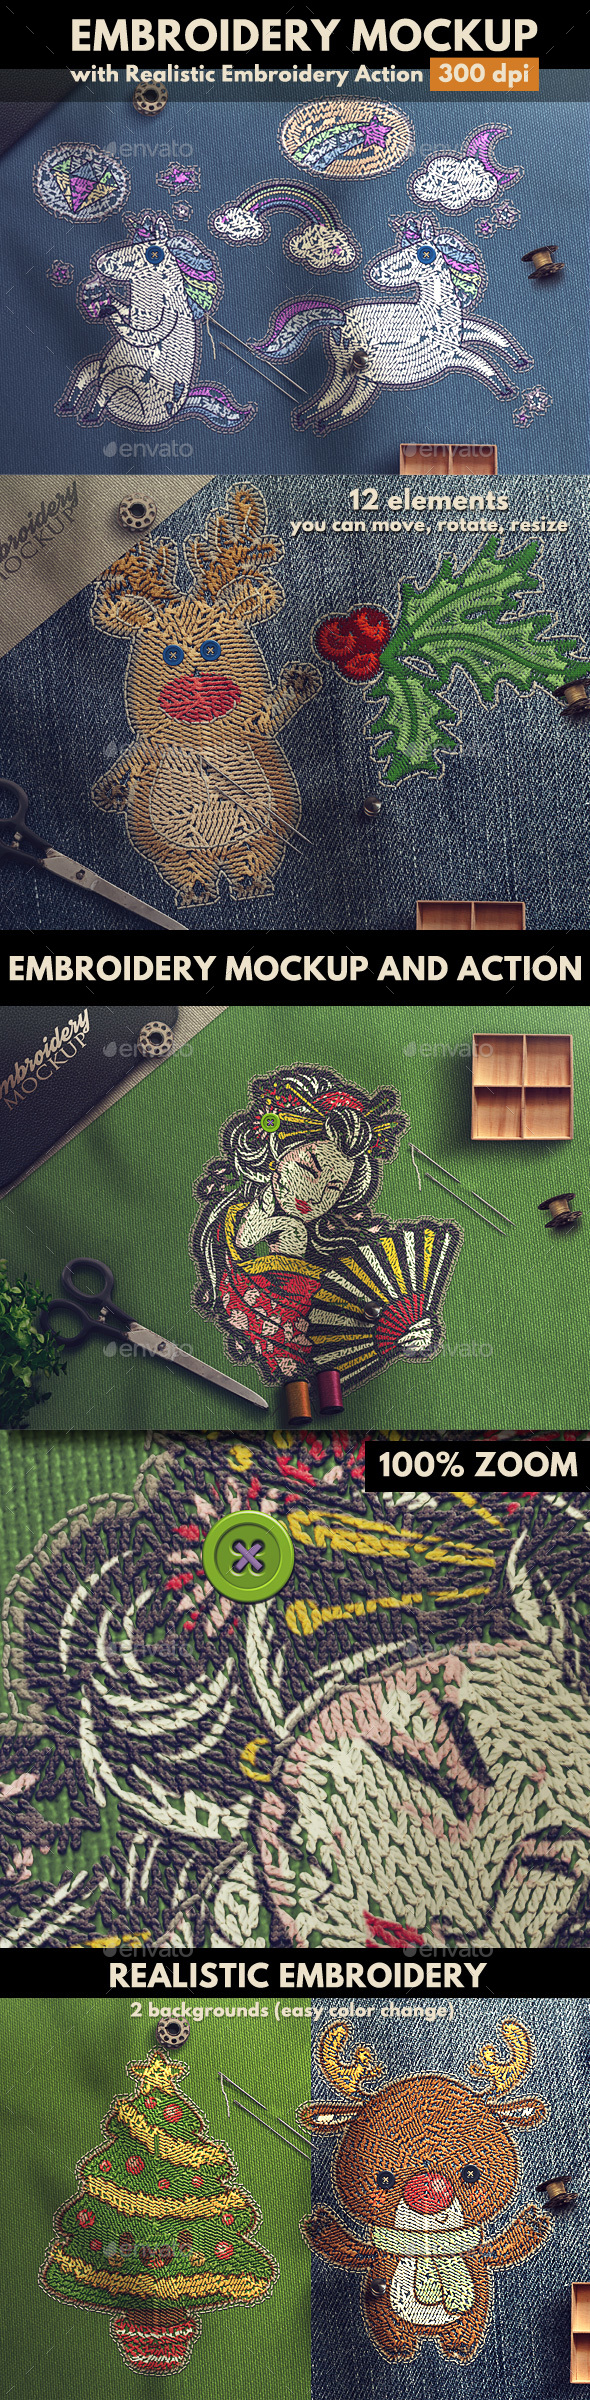 Embroidery Mockup with Embroidery Photoshop Action